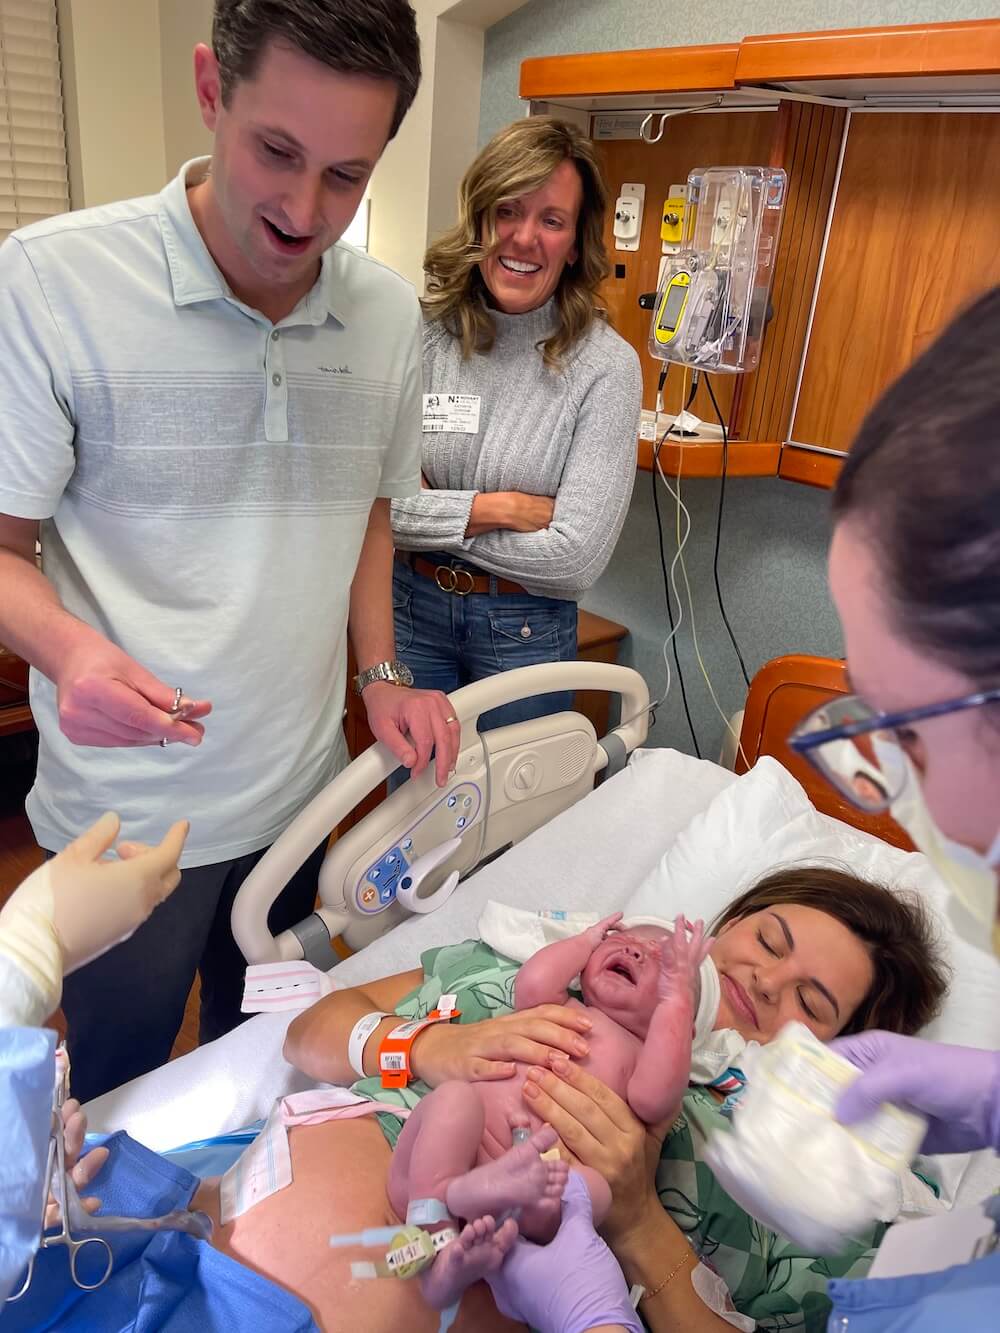 man and woman looking down at woman who just gave birth in hospital bed